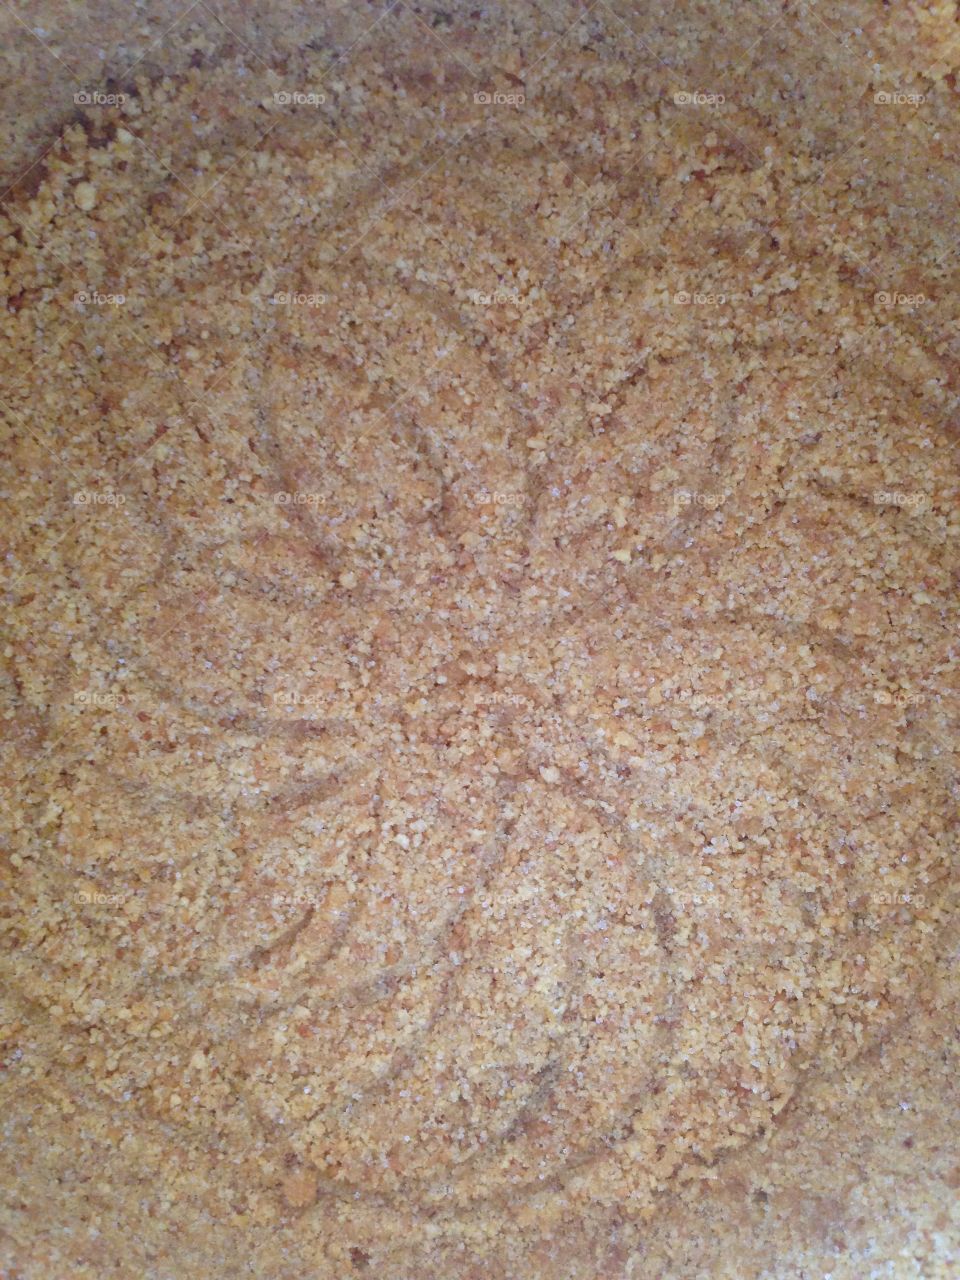 Pattern in sand (graham crackers)